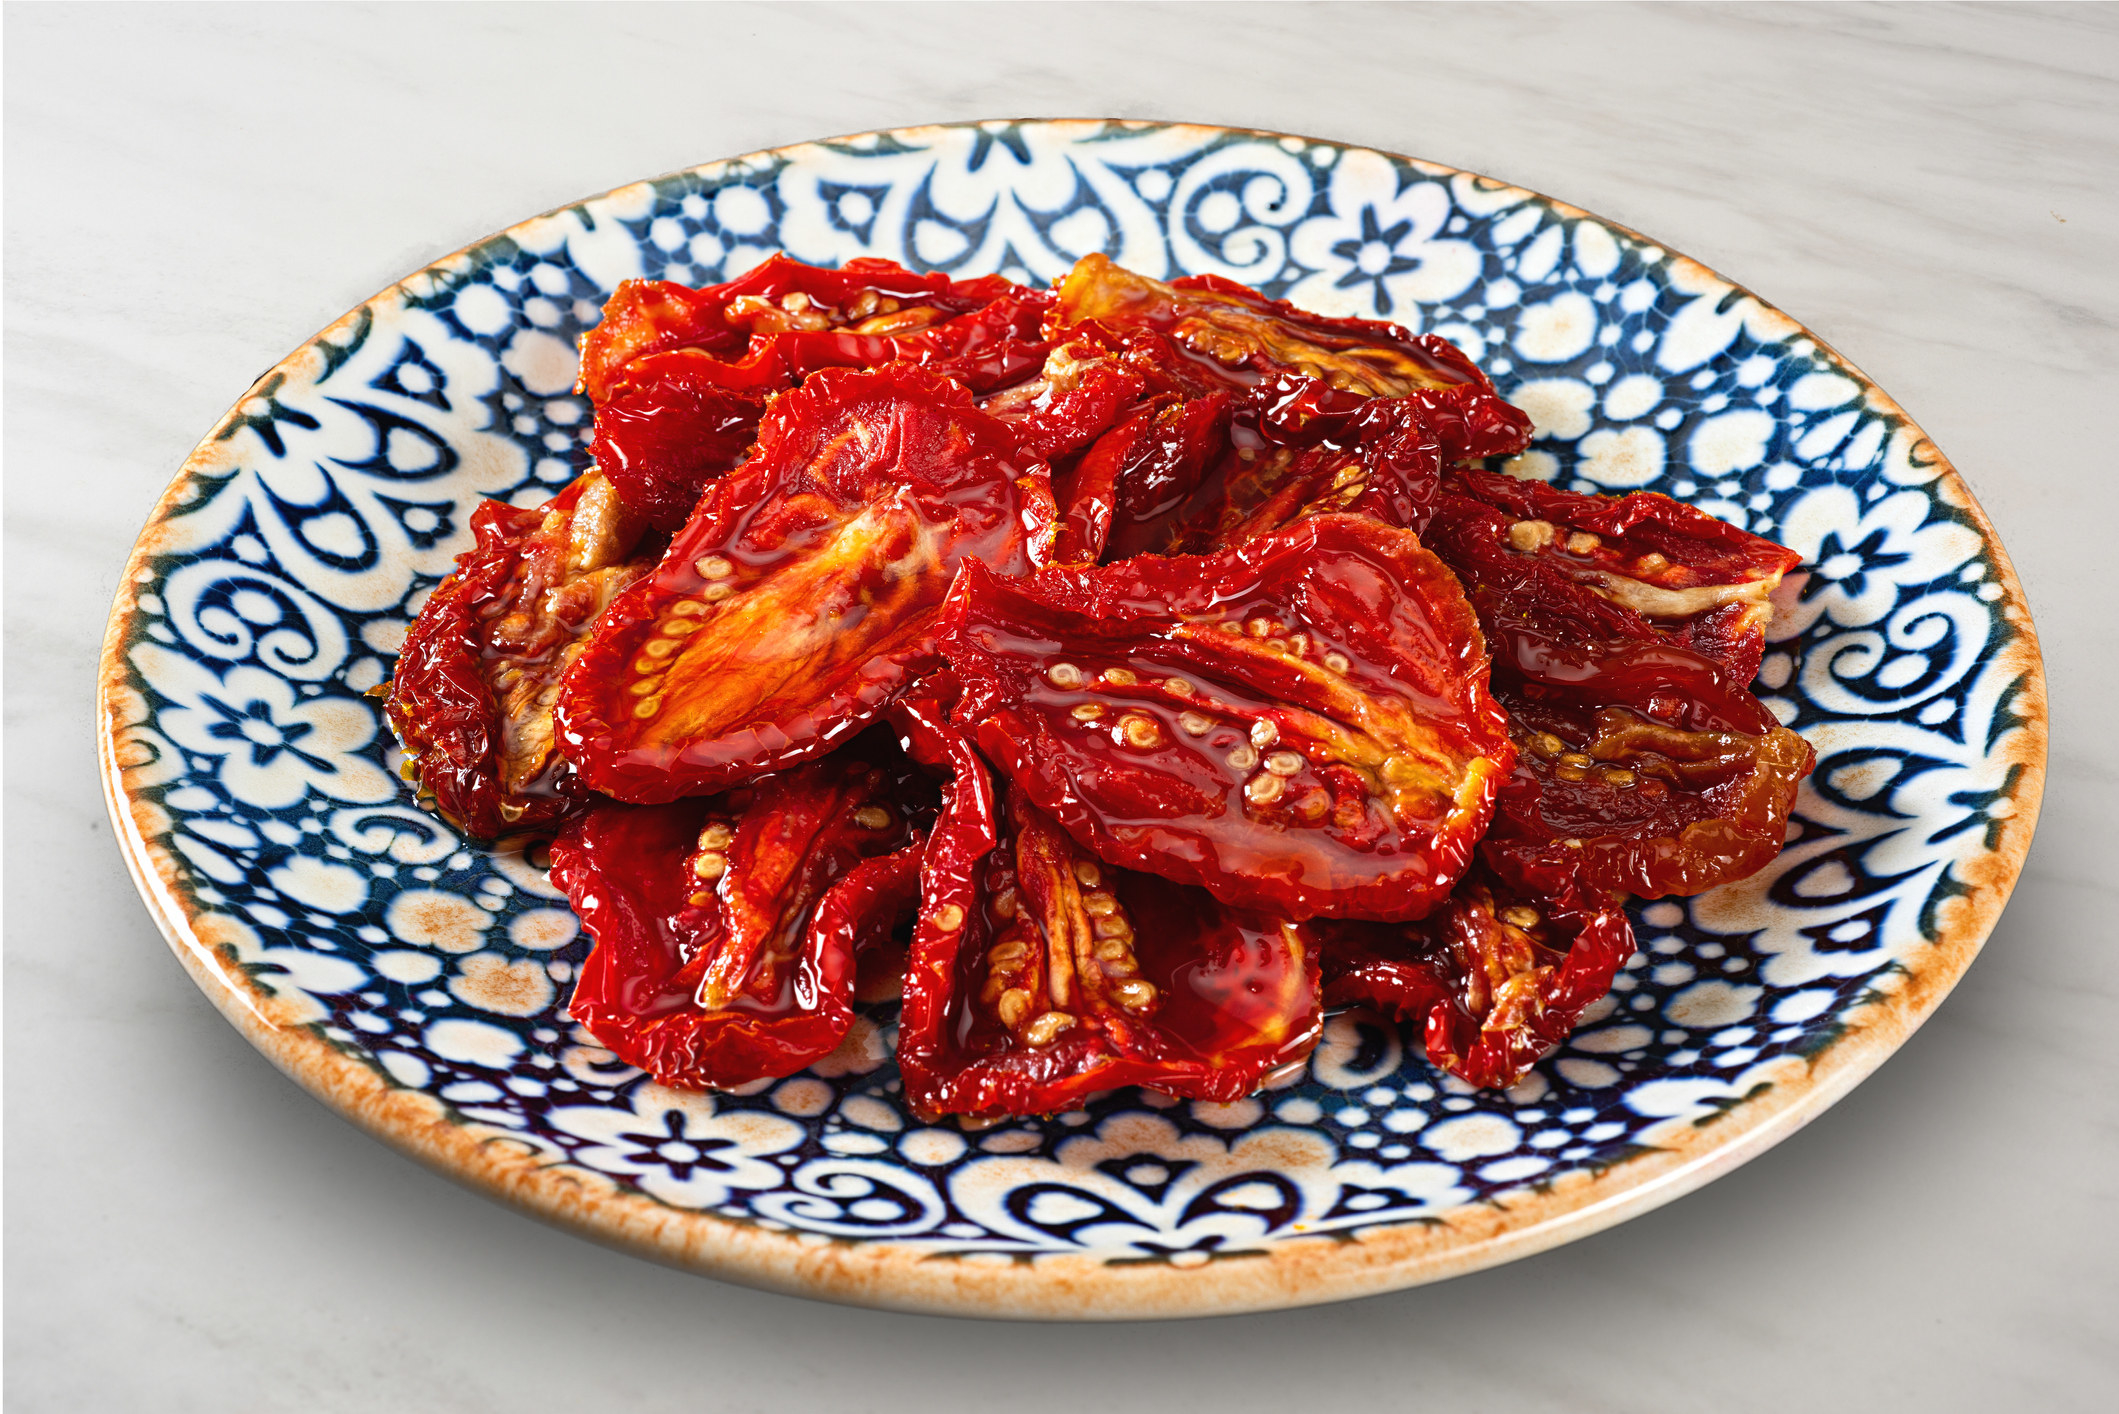 A plate of sun-dried tomatoes